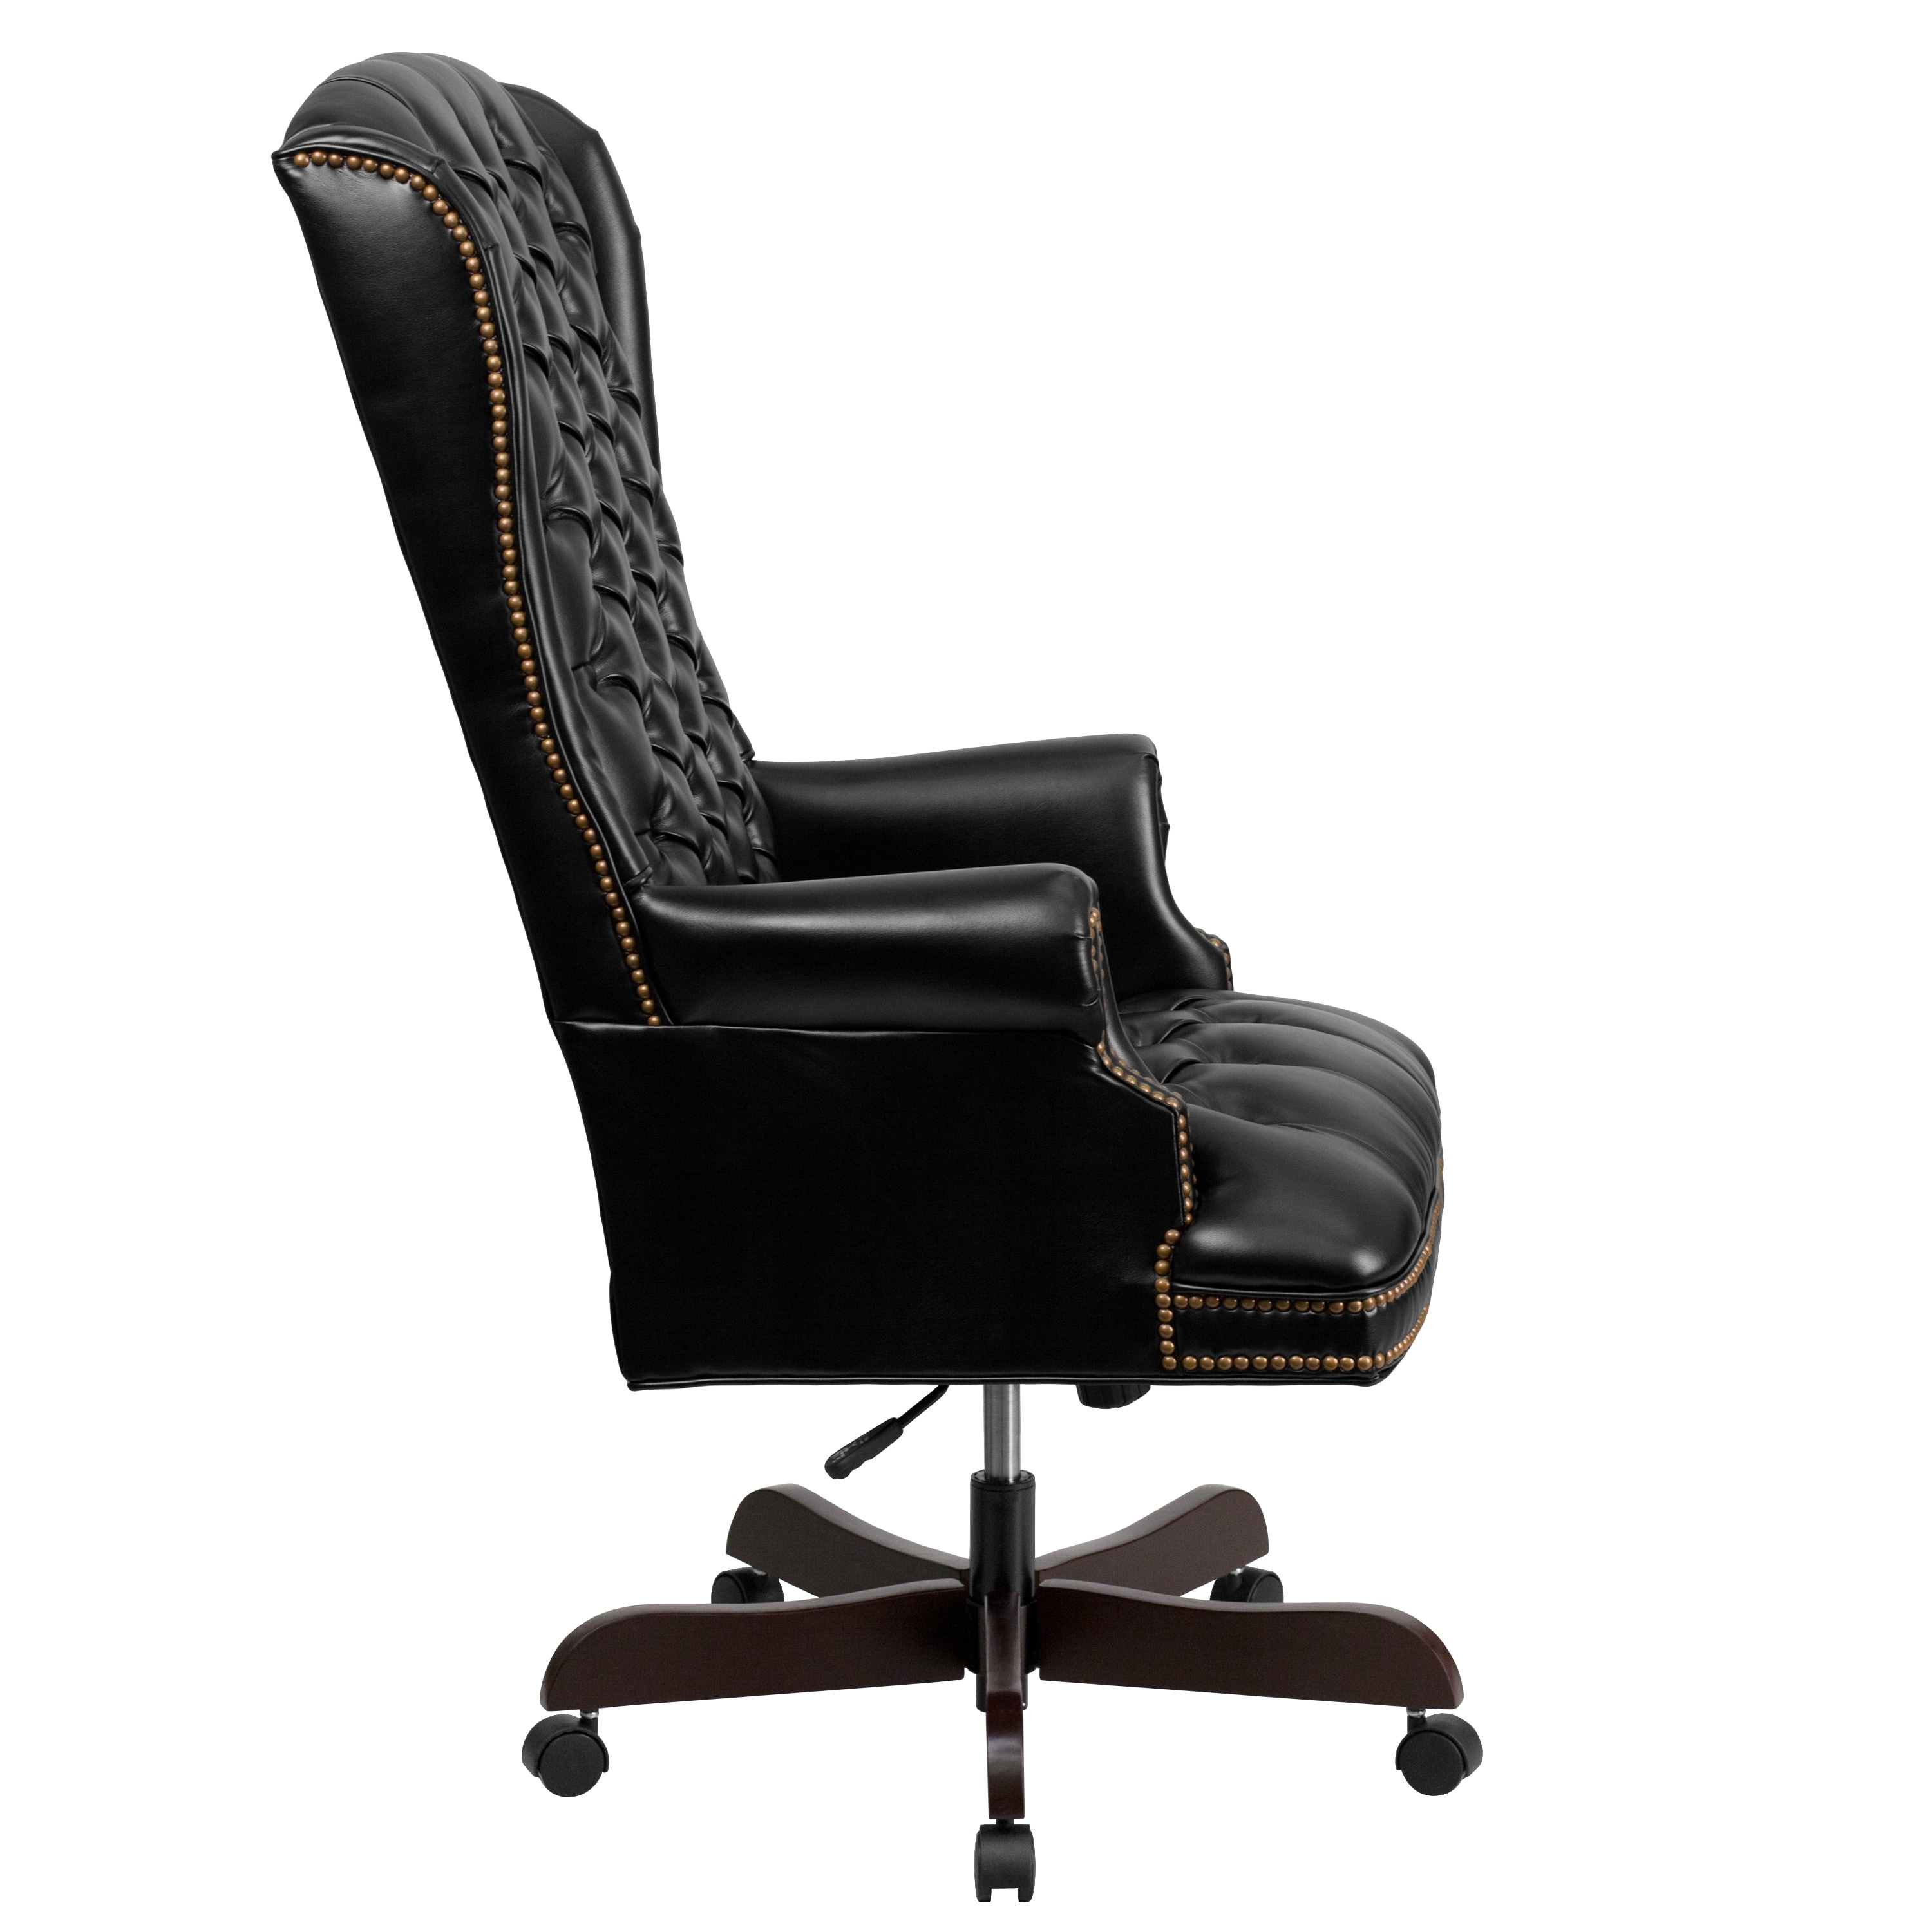 Boss Office Traditional High Back Faux Leather Tufted Executive Chair in Black 